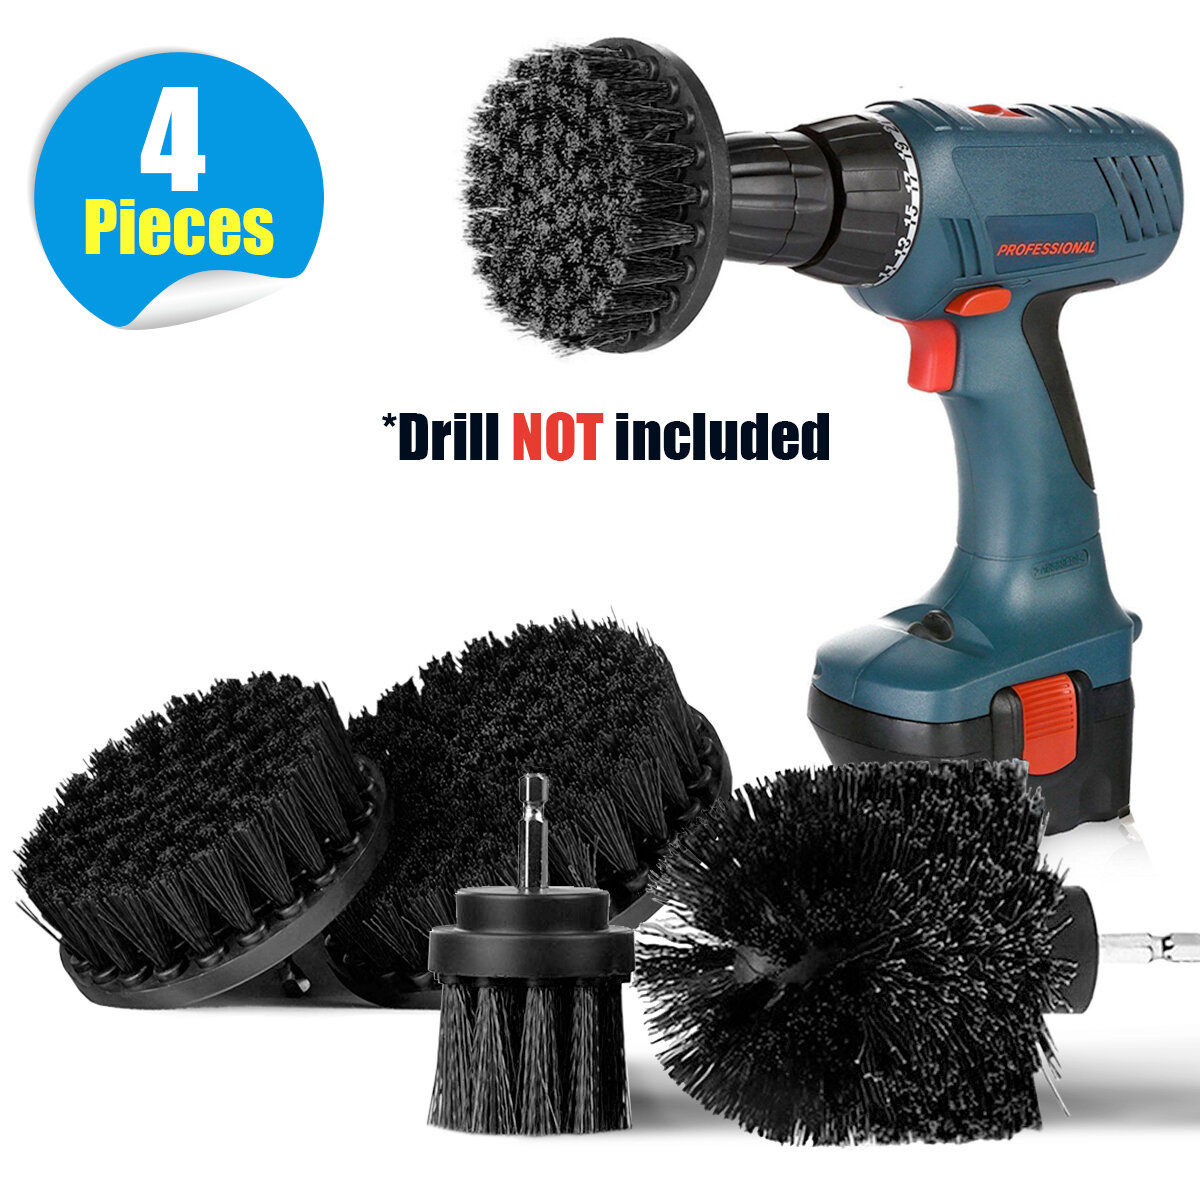 best price,safetyon,drill,brush,4,pieces,eu,coupon,price,discount